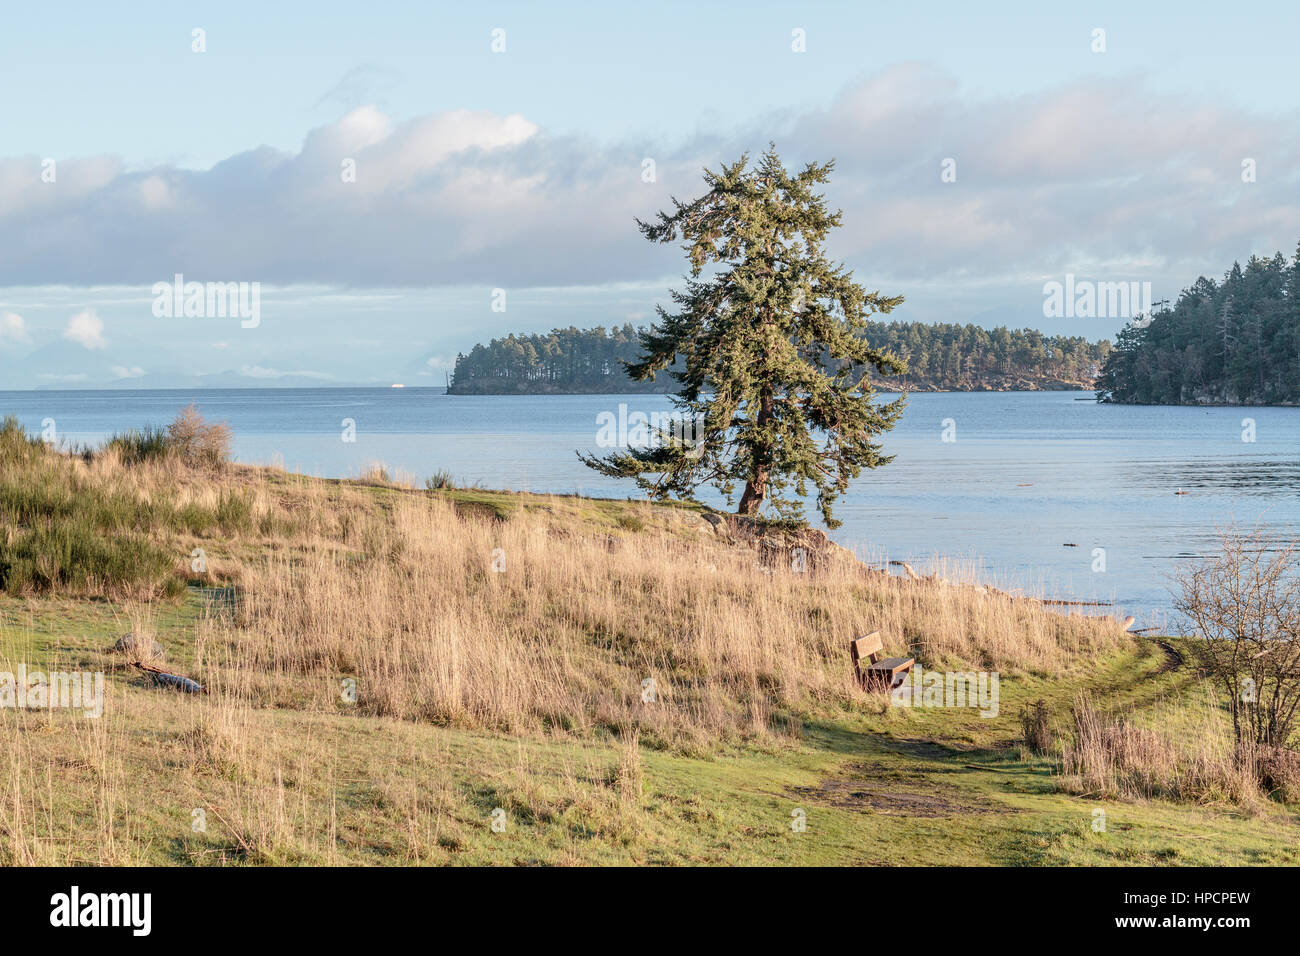 On a sunny winter day the park is deserted, with only a lone tree and bench overlooking the Strait of Georgia and Flat Top Islands (British Columbia). Stock Photo